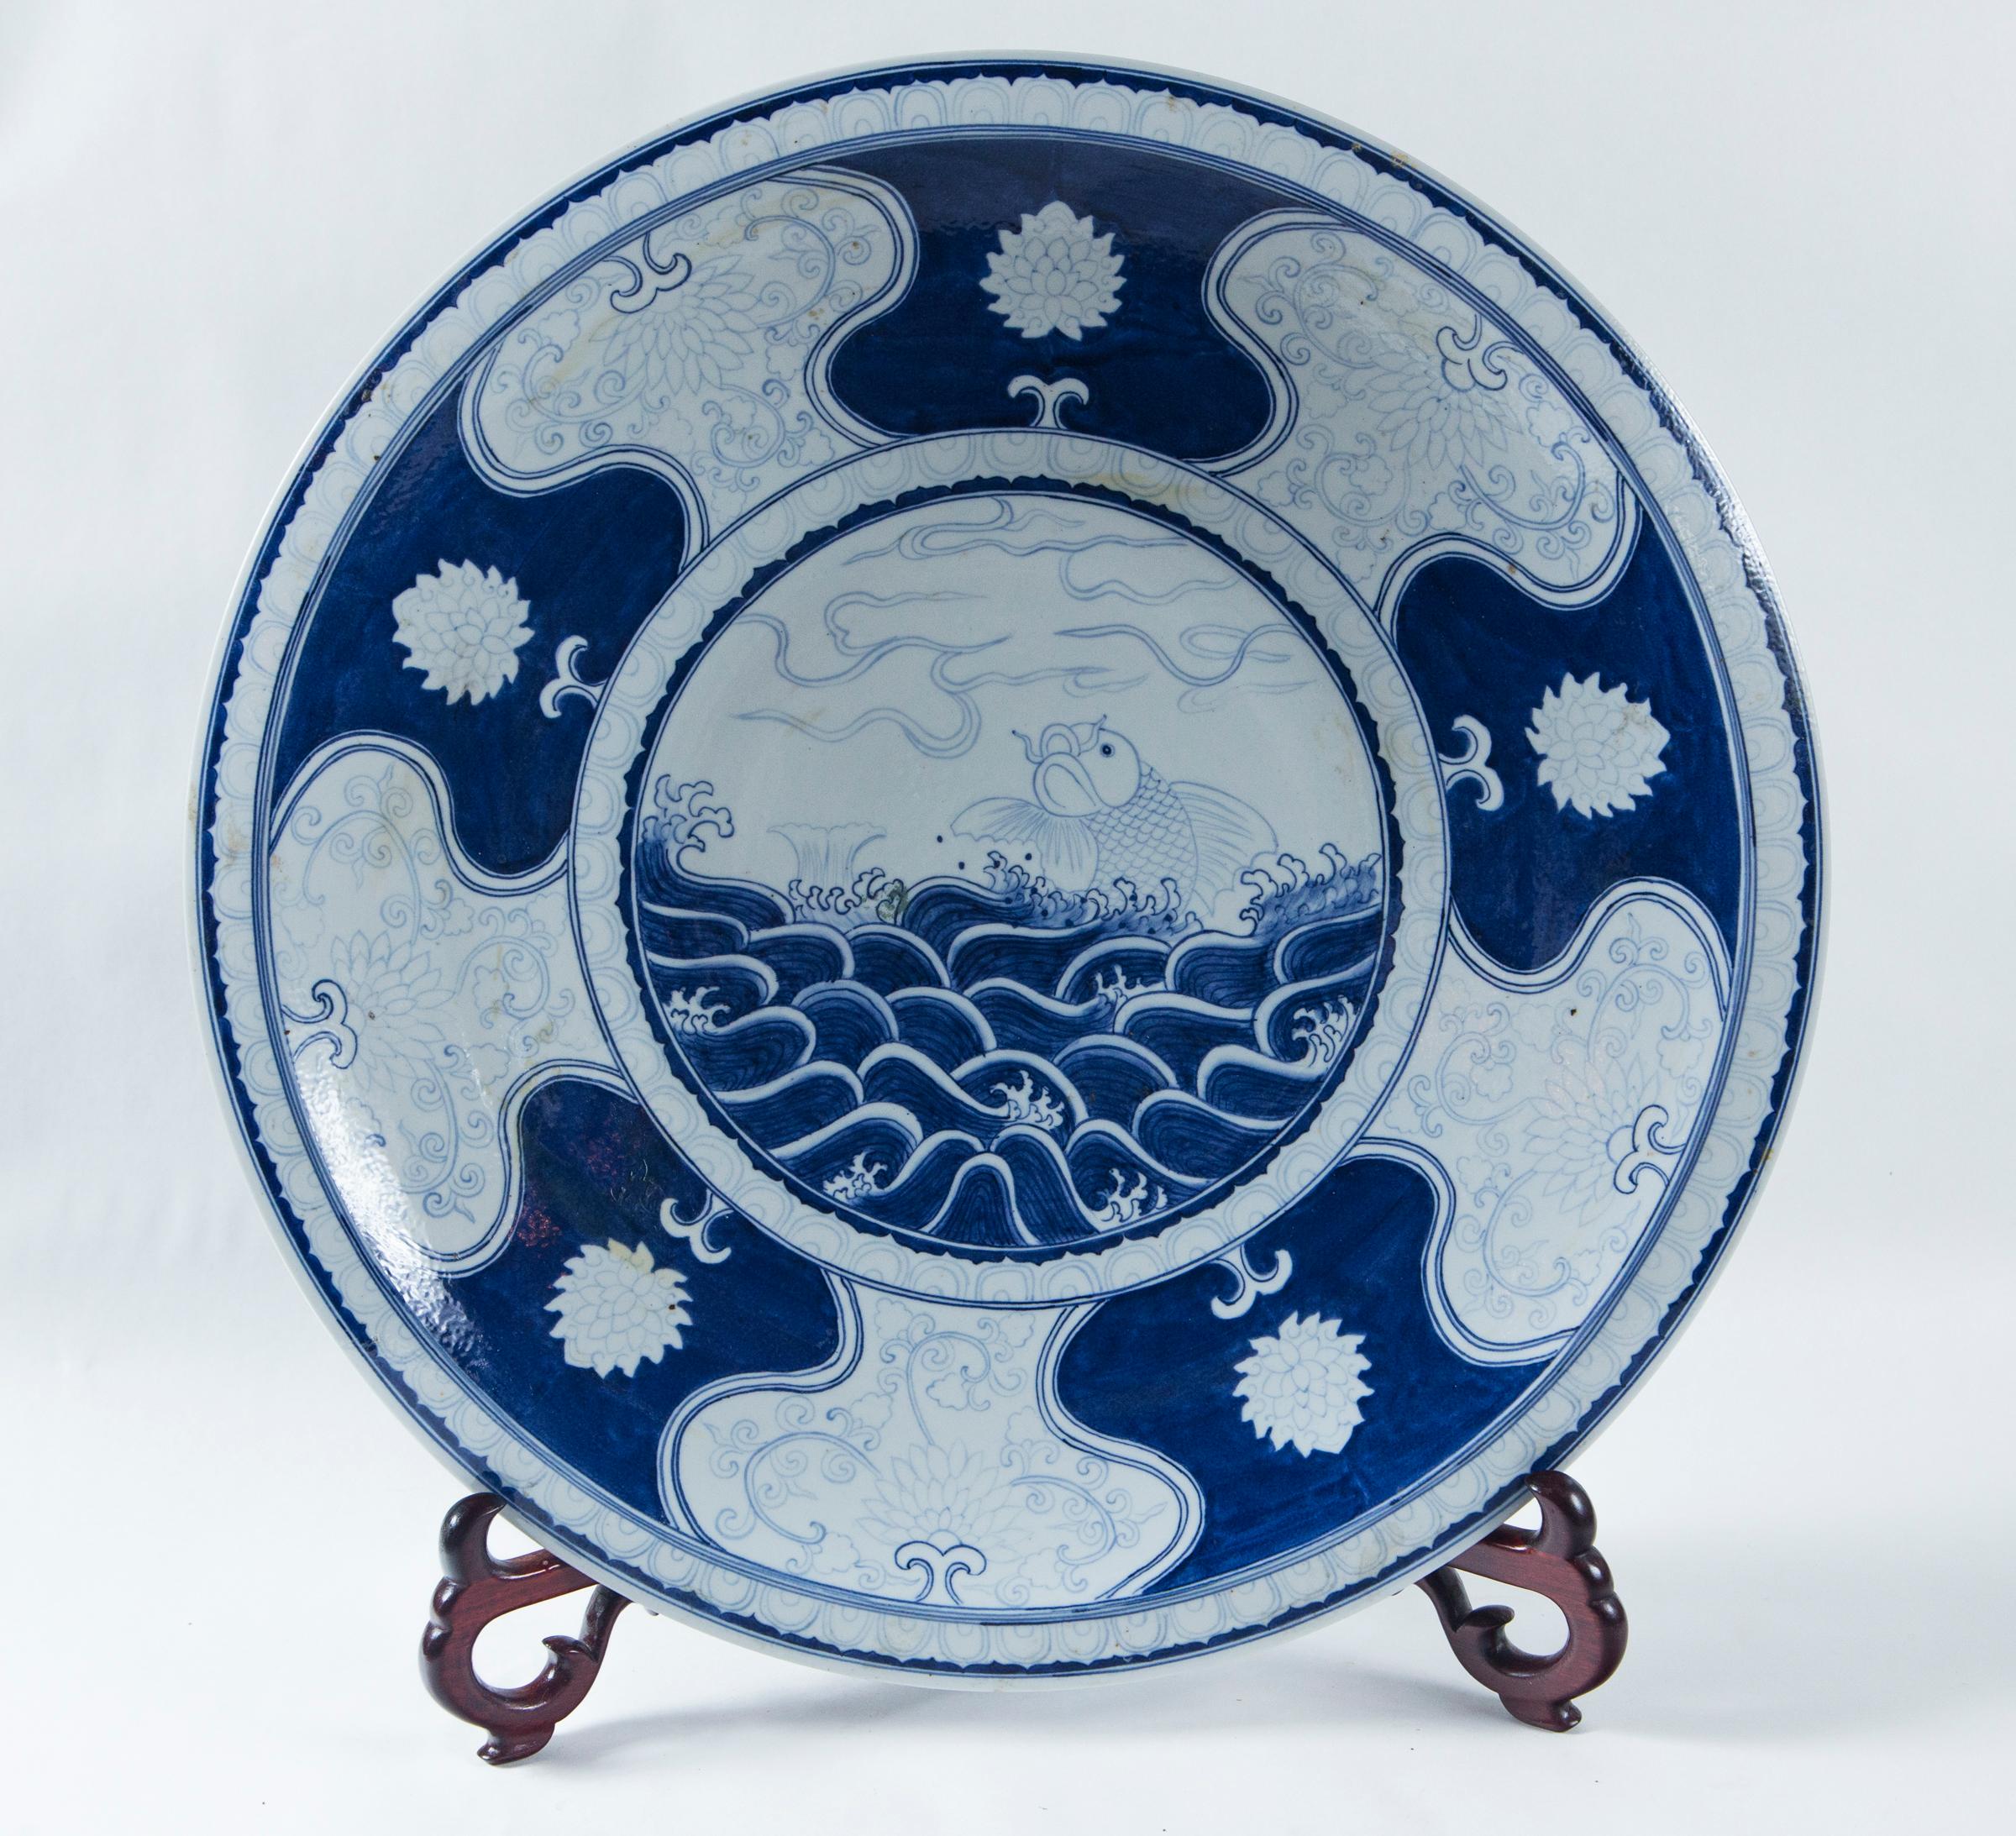 Decorated in in cobalt blue, with ocean waves and a jumping fish in the center. Surrounded by lobe shapes and flowers, possibly chrysanthemums. The outside decorated with plaques of floral and tendril design.